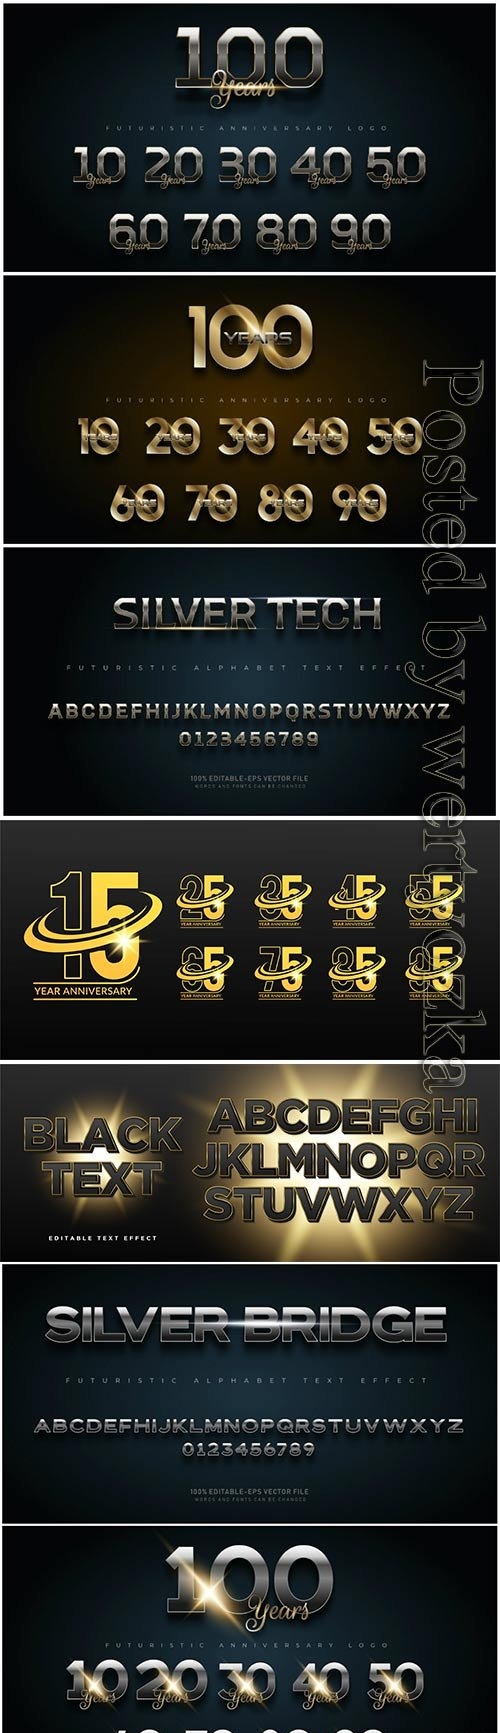 Gold and silver anniversary number set logo, alphabet fonts with text effect